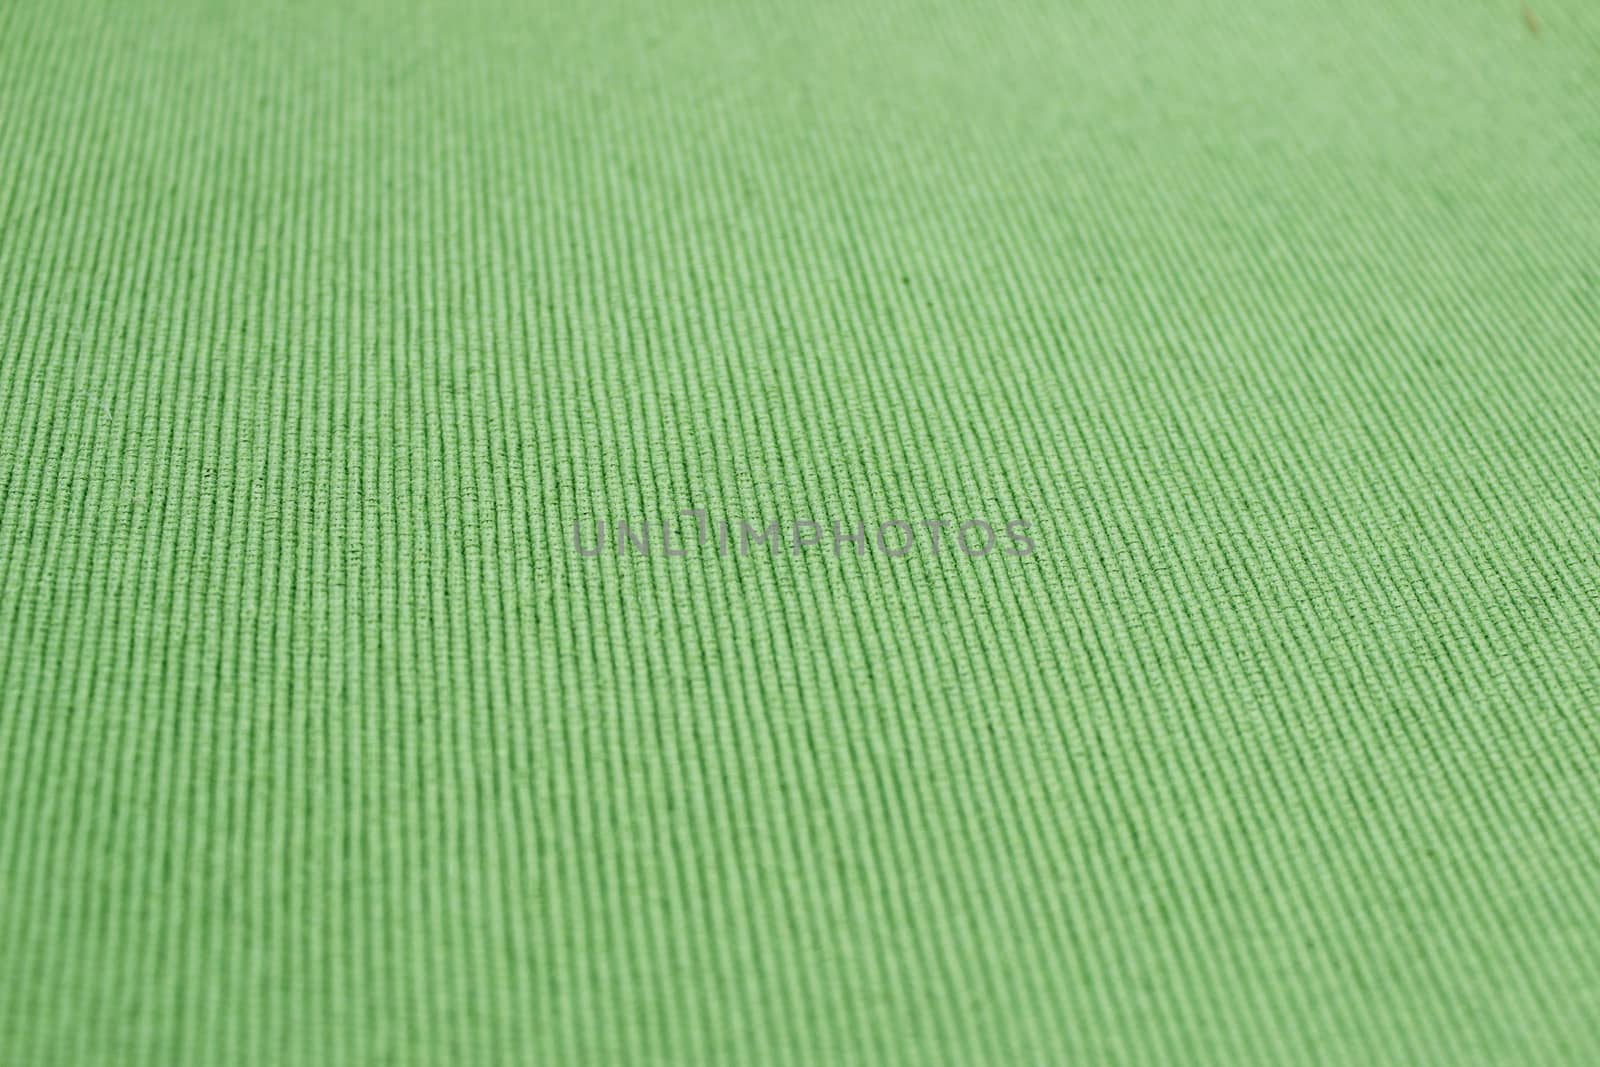 Woven cotton linen fabric textile textured backdrop in pastel light yellow spring green color tone: Eco friendly material